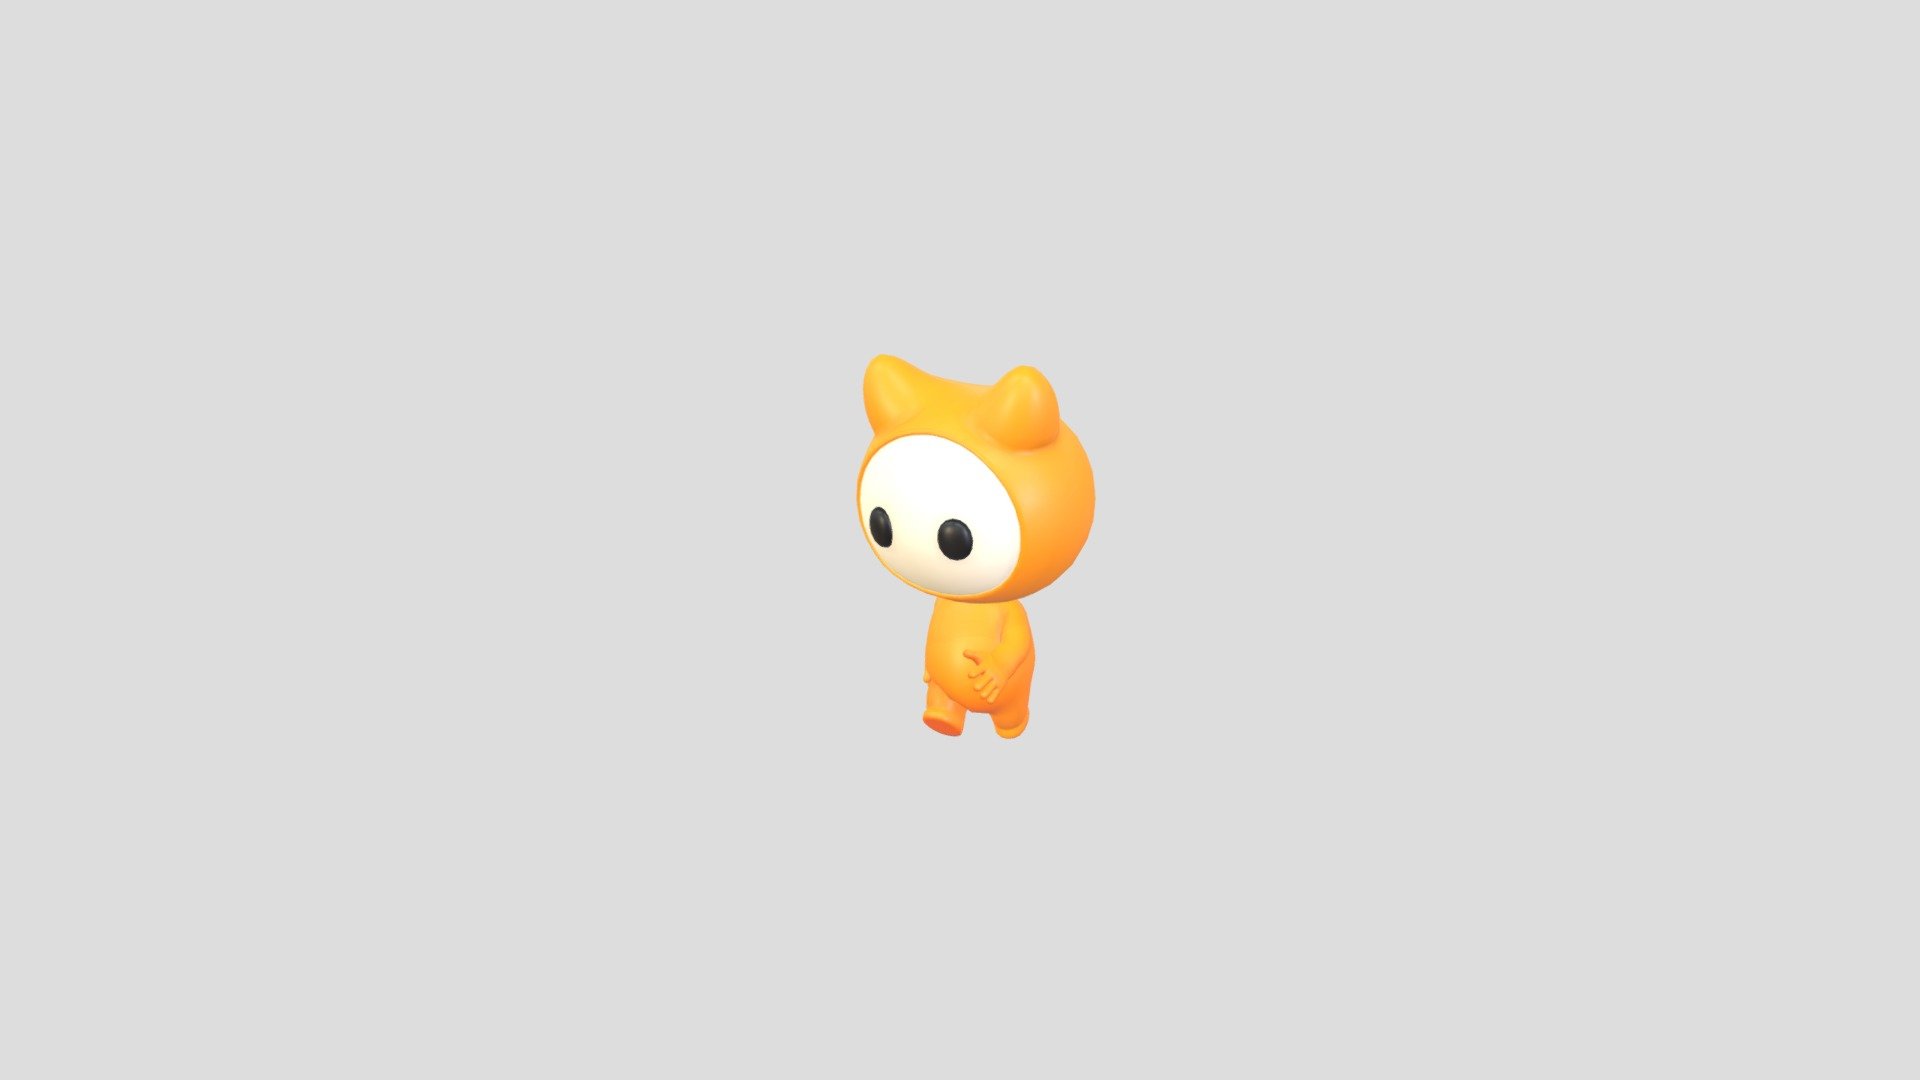 Rigged Mascot 3d model.      
    


File Format      
 
- 3ds max 2021  
 
- FBX  
 
- OBJ  
    


Clean topology    

Rig with CAT in 3ds Max                          

Bone and Weight skin are in fbx file                 

No Facial Rig               

No Animation               

Non-overlapping unwrapped UVs        
 


PNG texture               

2048x2048                


- Base Color                        

- Roughness                         



3,490 polygons                          

3,354 vertexs                          
 - Character179 Rigged Mascot - Buy Royalty Free 3D model by BaluCG 3d model